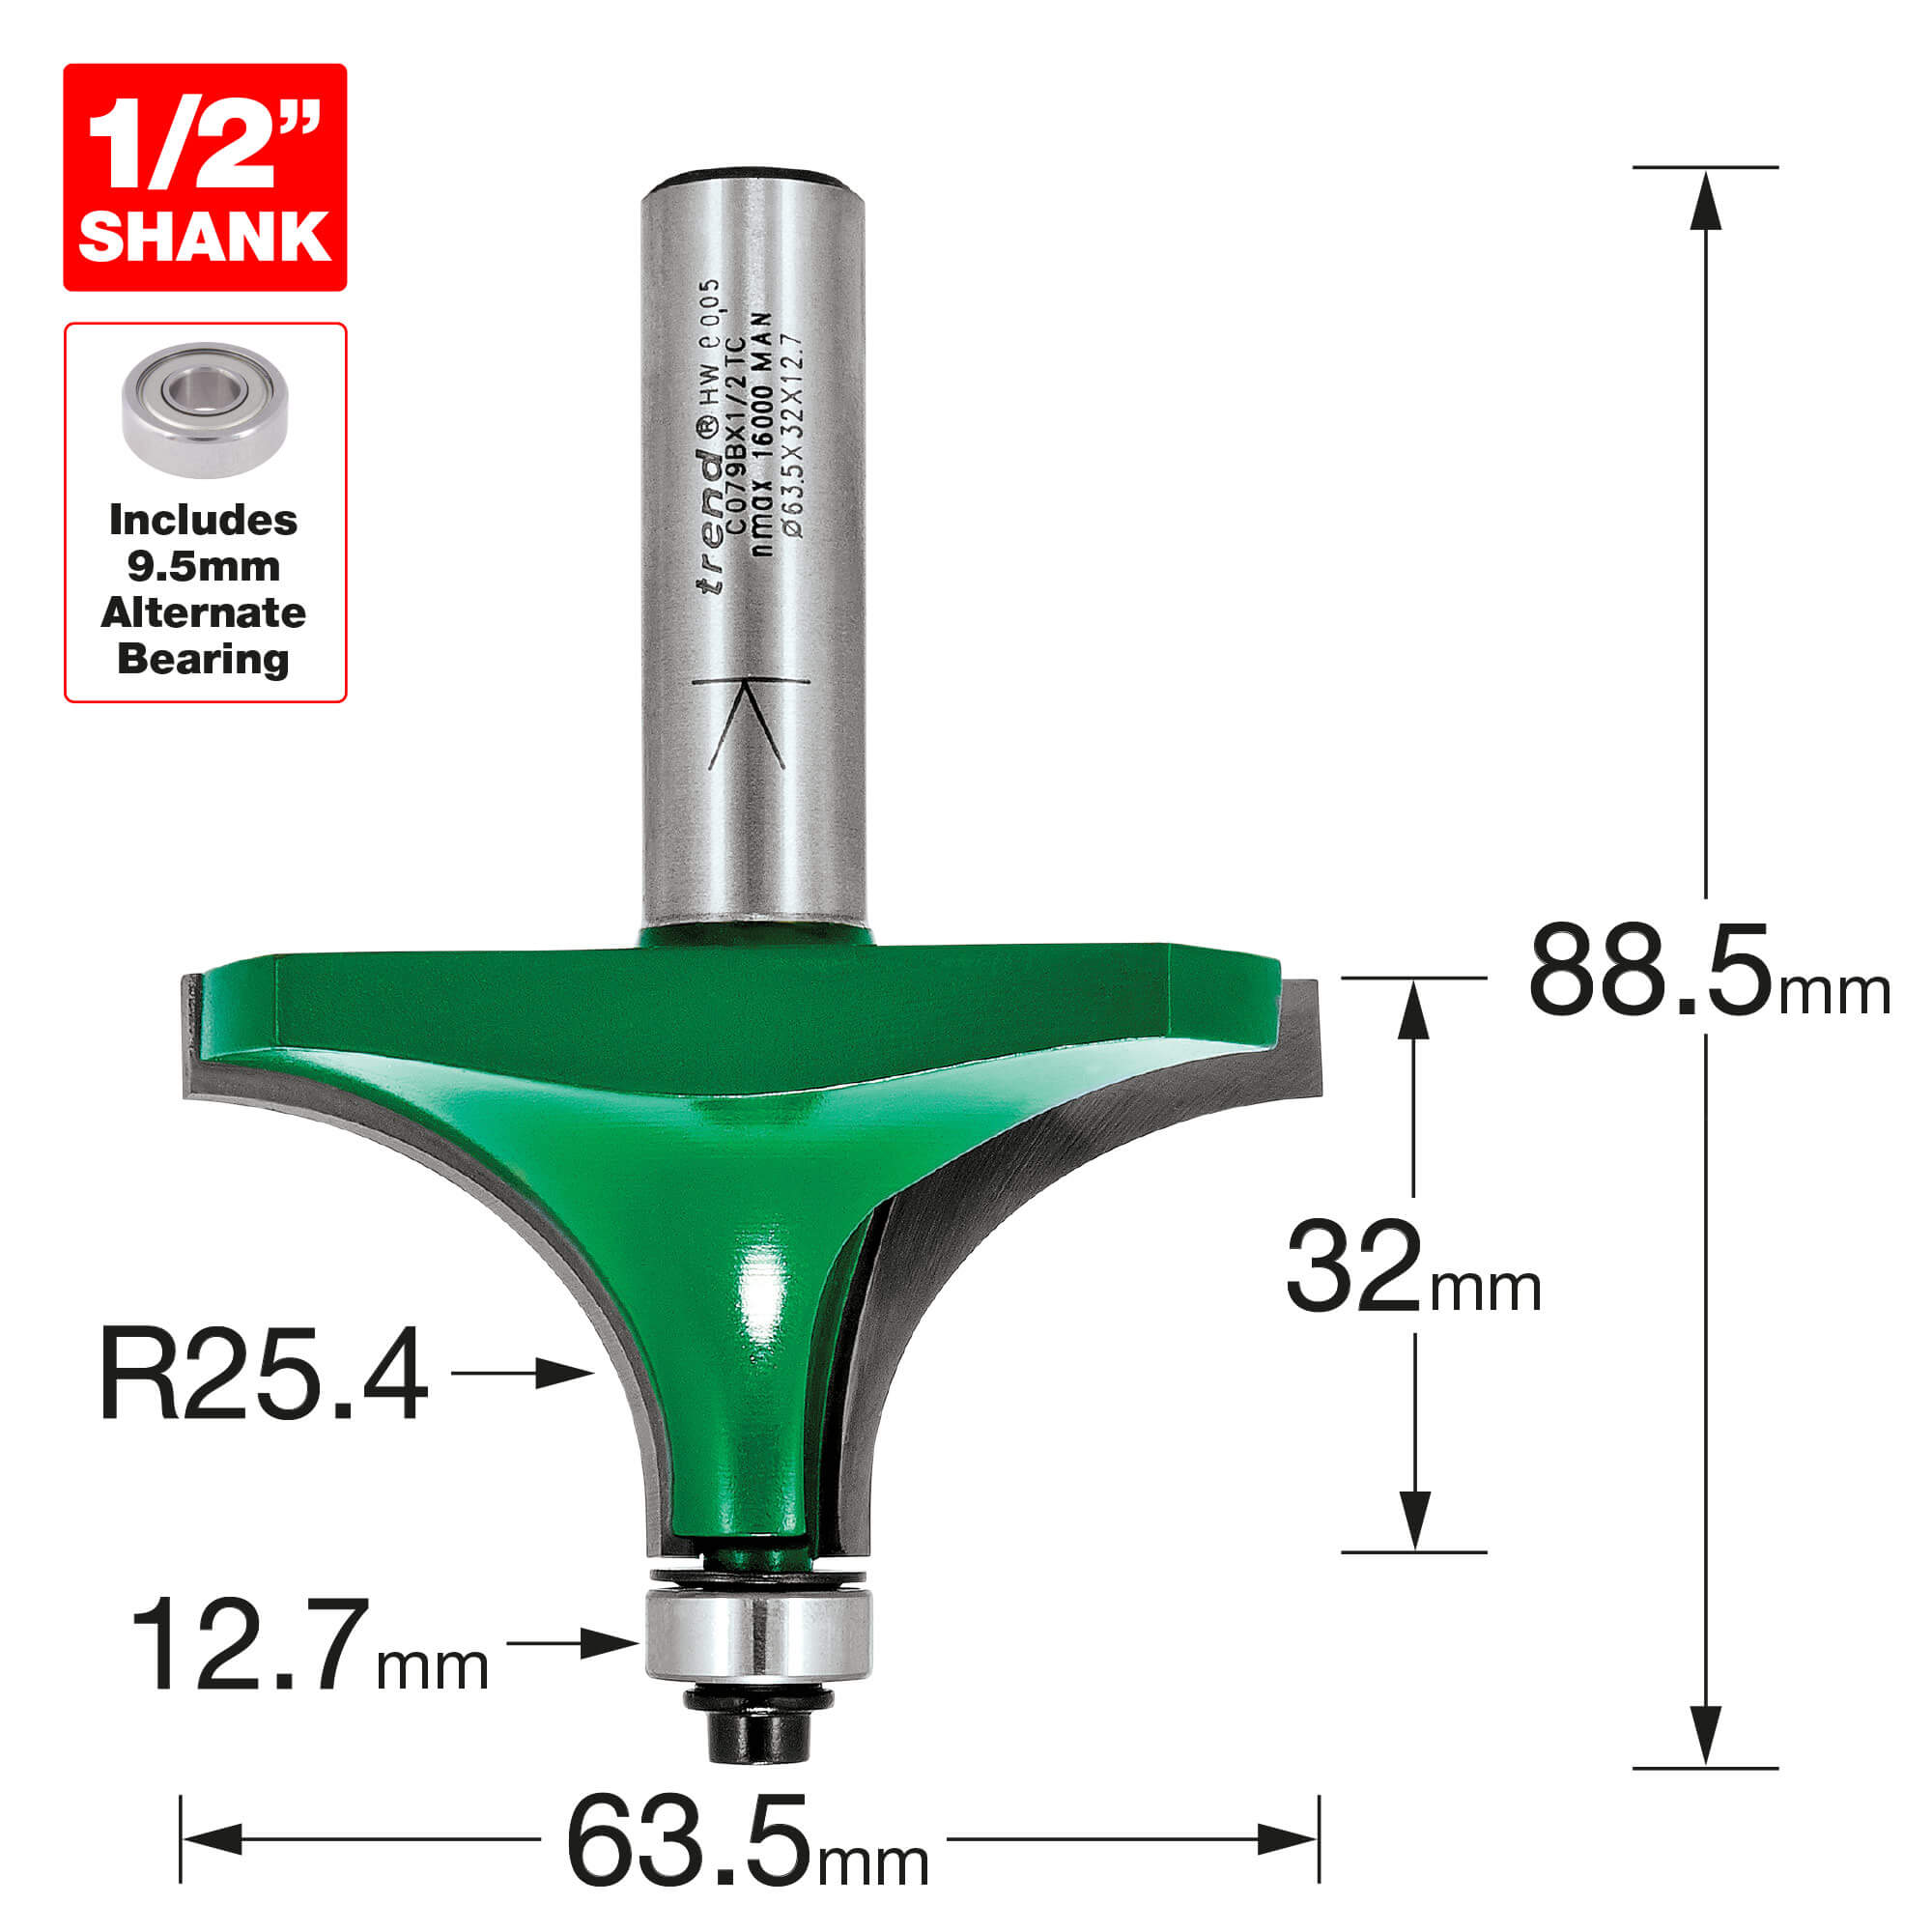 Image of Trend CraftPro Bearing Guided Round Over and Ovolo Router Cutter 63.5mm 32mm 1/2"